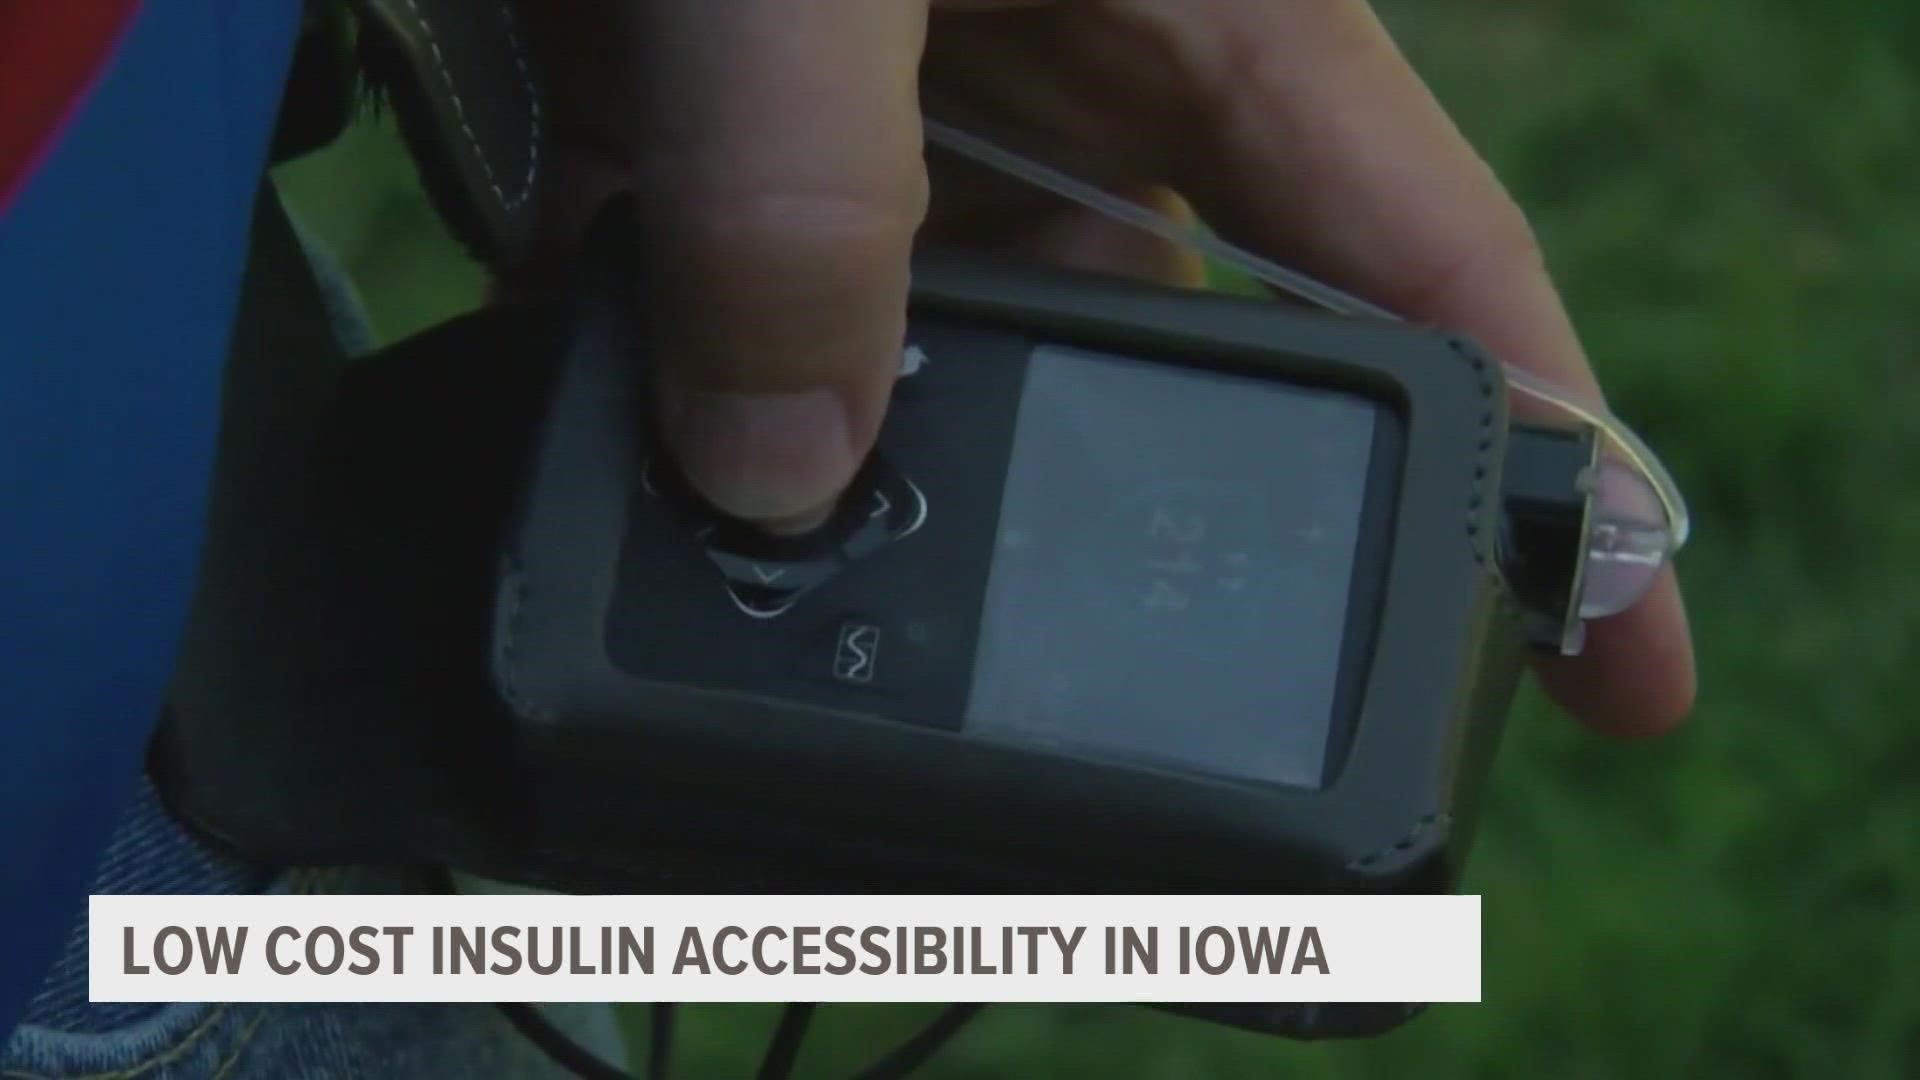 Iowa Democrats passed the Inflation Reduction Act through the senate Sunday, but one topic was missing from the final bill: insulin price caps.